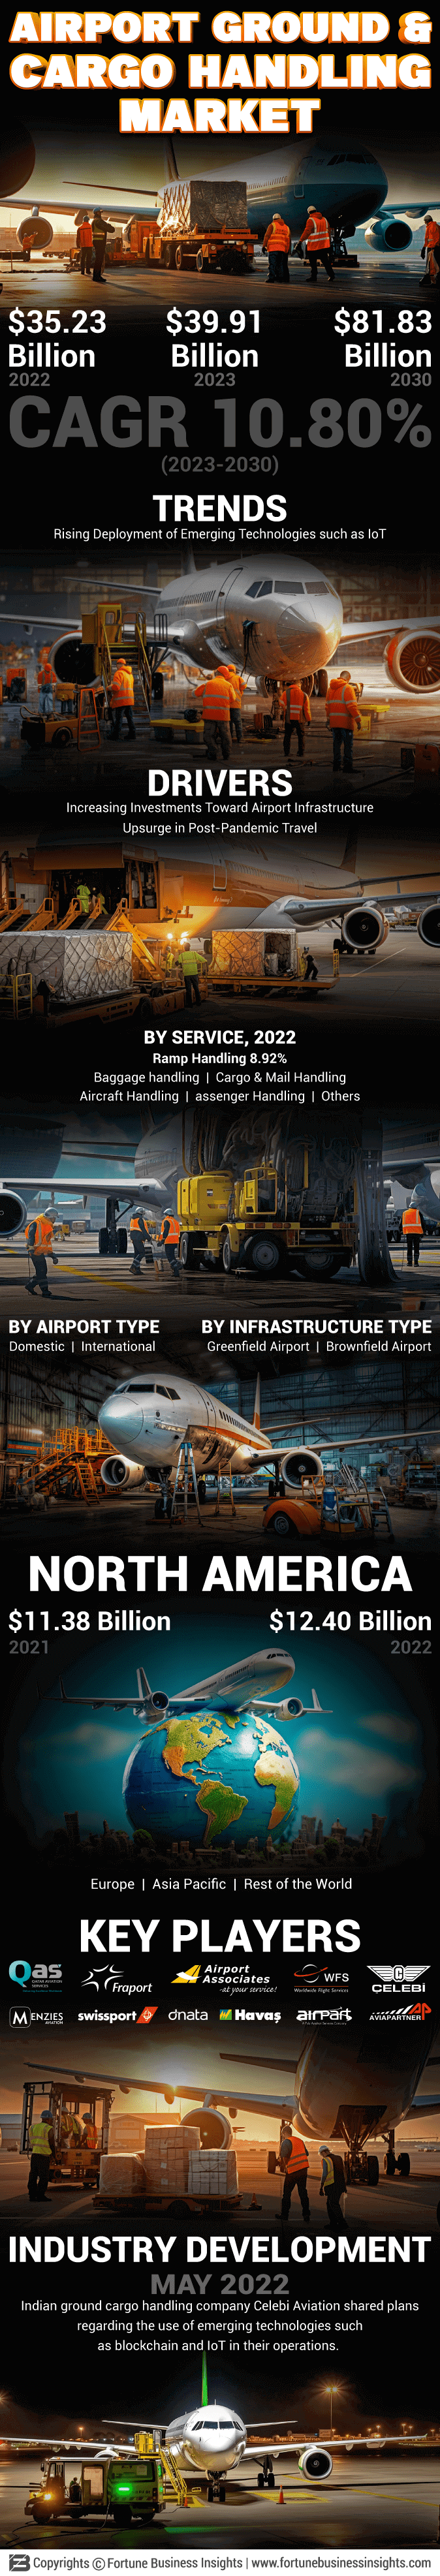 Airport Ground and Cargo Handling Services Market